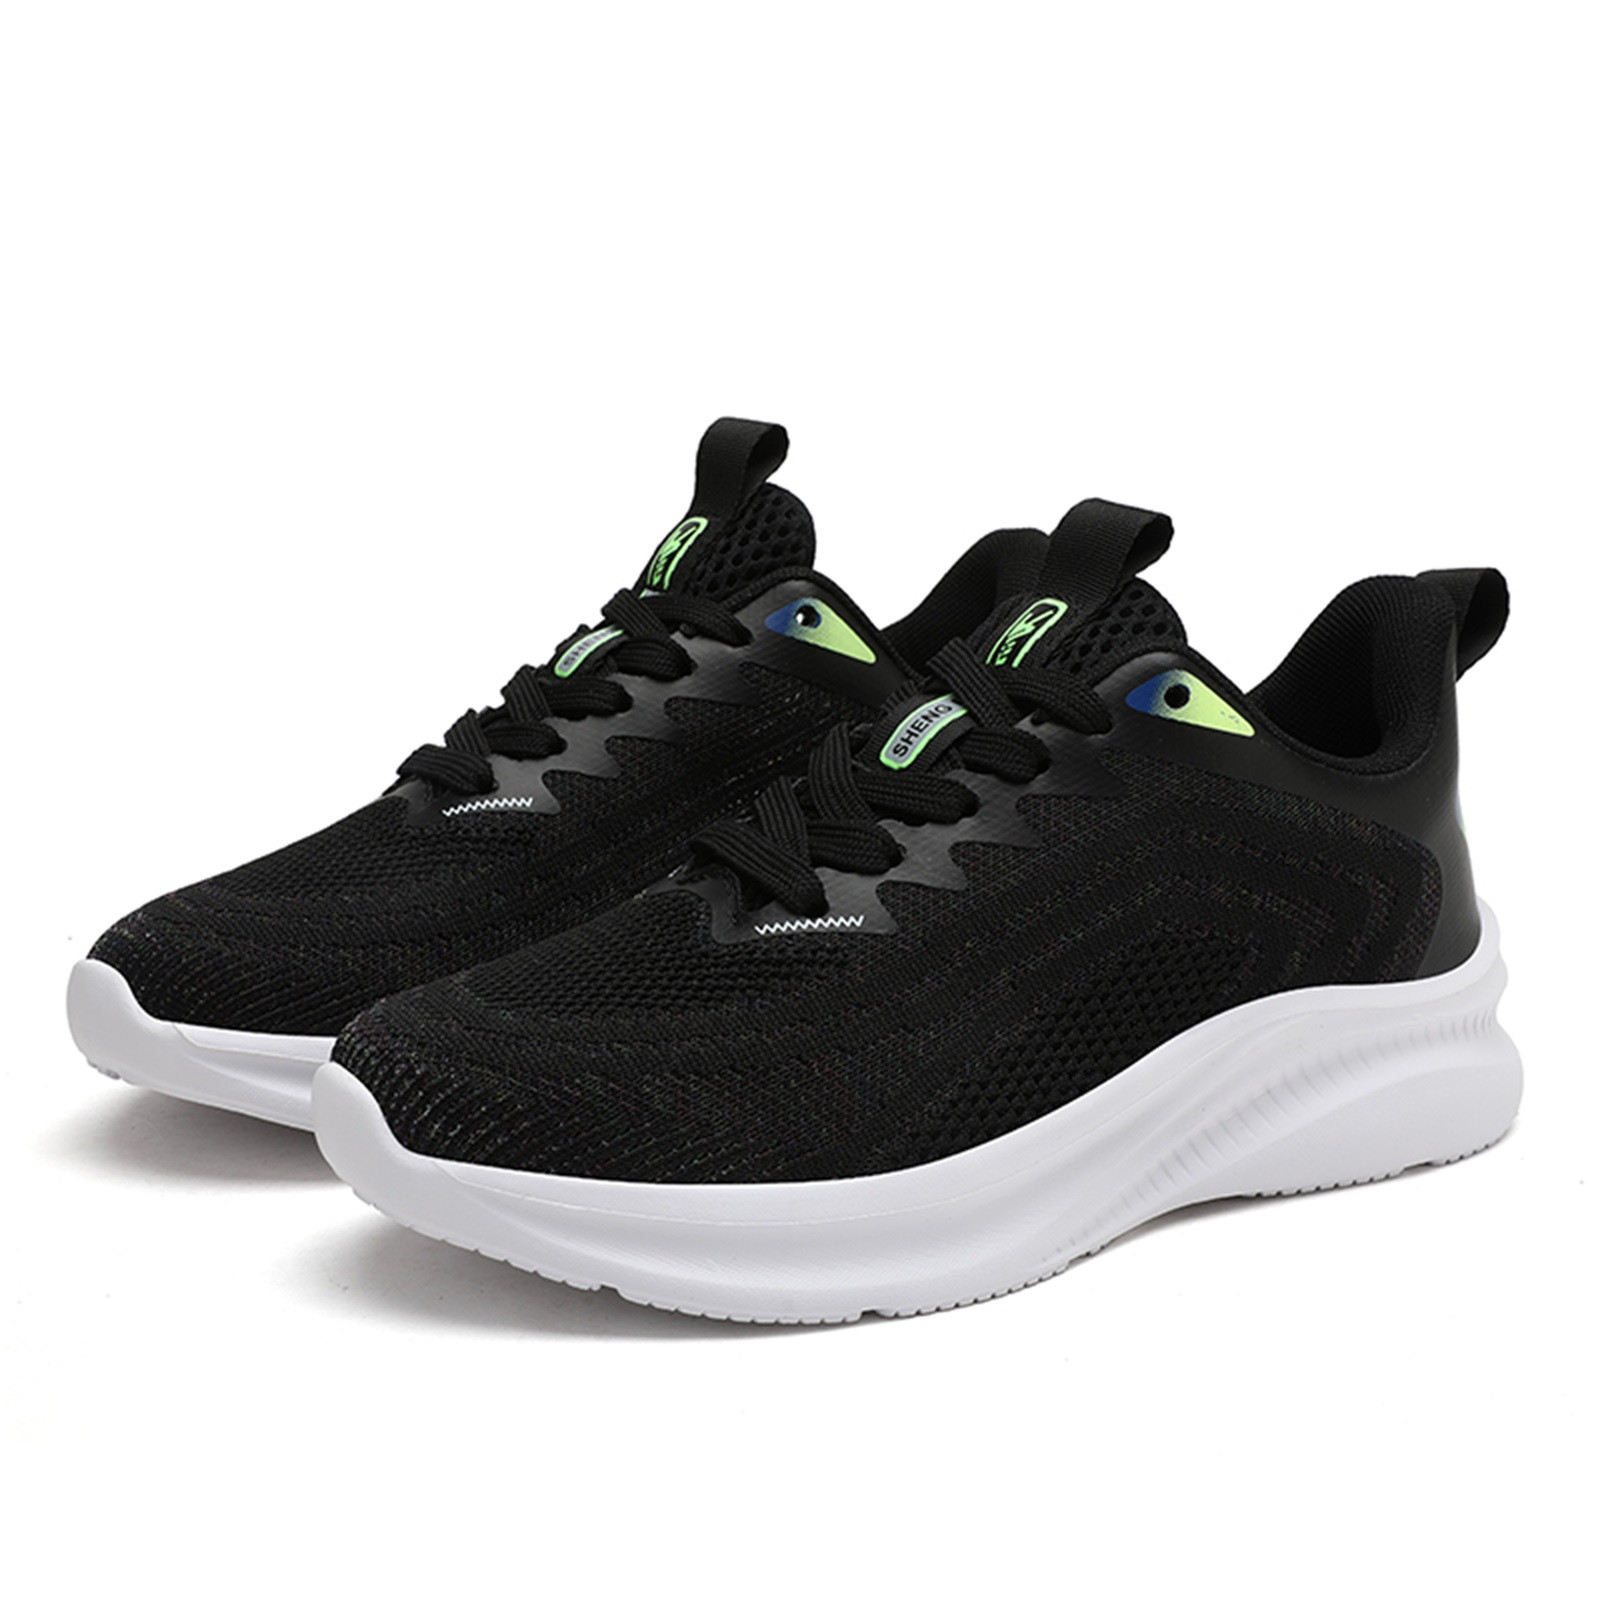 KaLI_store Mens Running Shoes Men Shoes Breathable Running Shoes Non-Slip Fashion Sneakers Black,11 - image 5 of 5